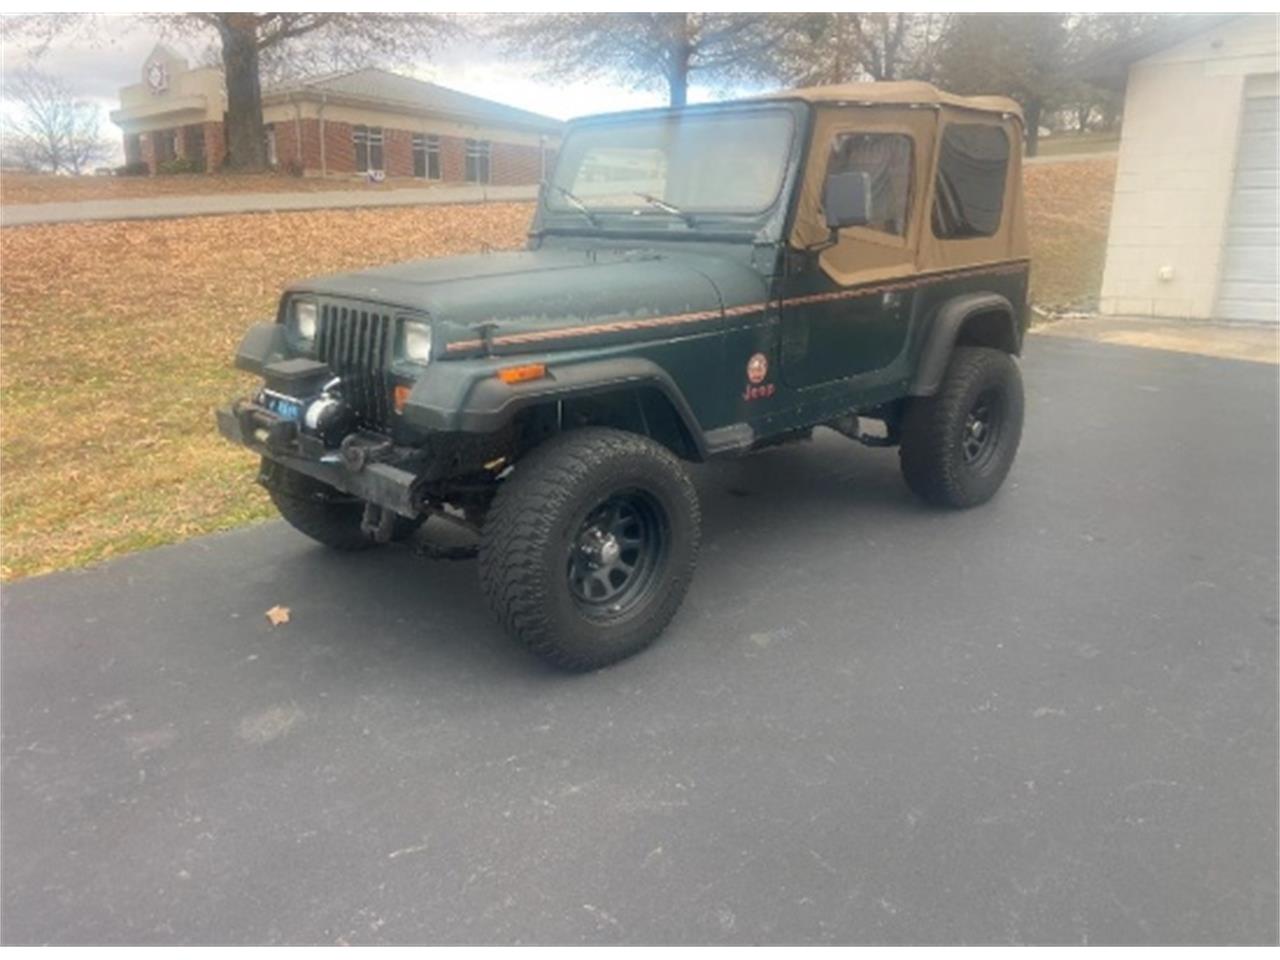 For Sale at Auction: 1993 Jeep Wrangler in Shawnee, Oklahoma for sale in Shawnee, OK